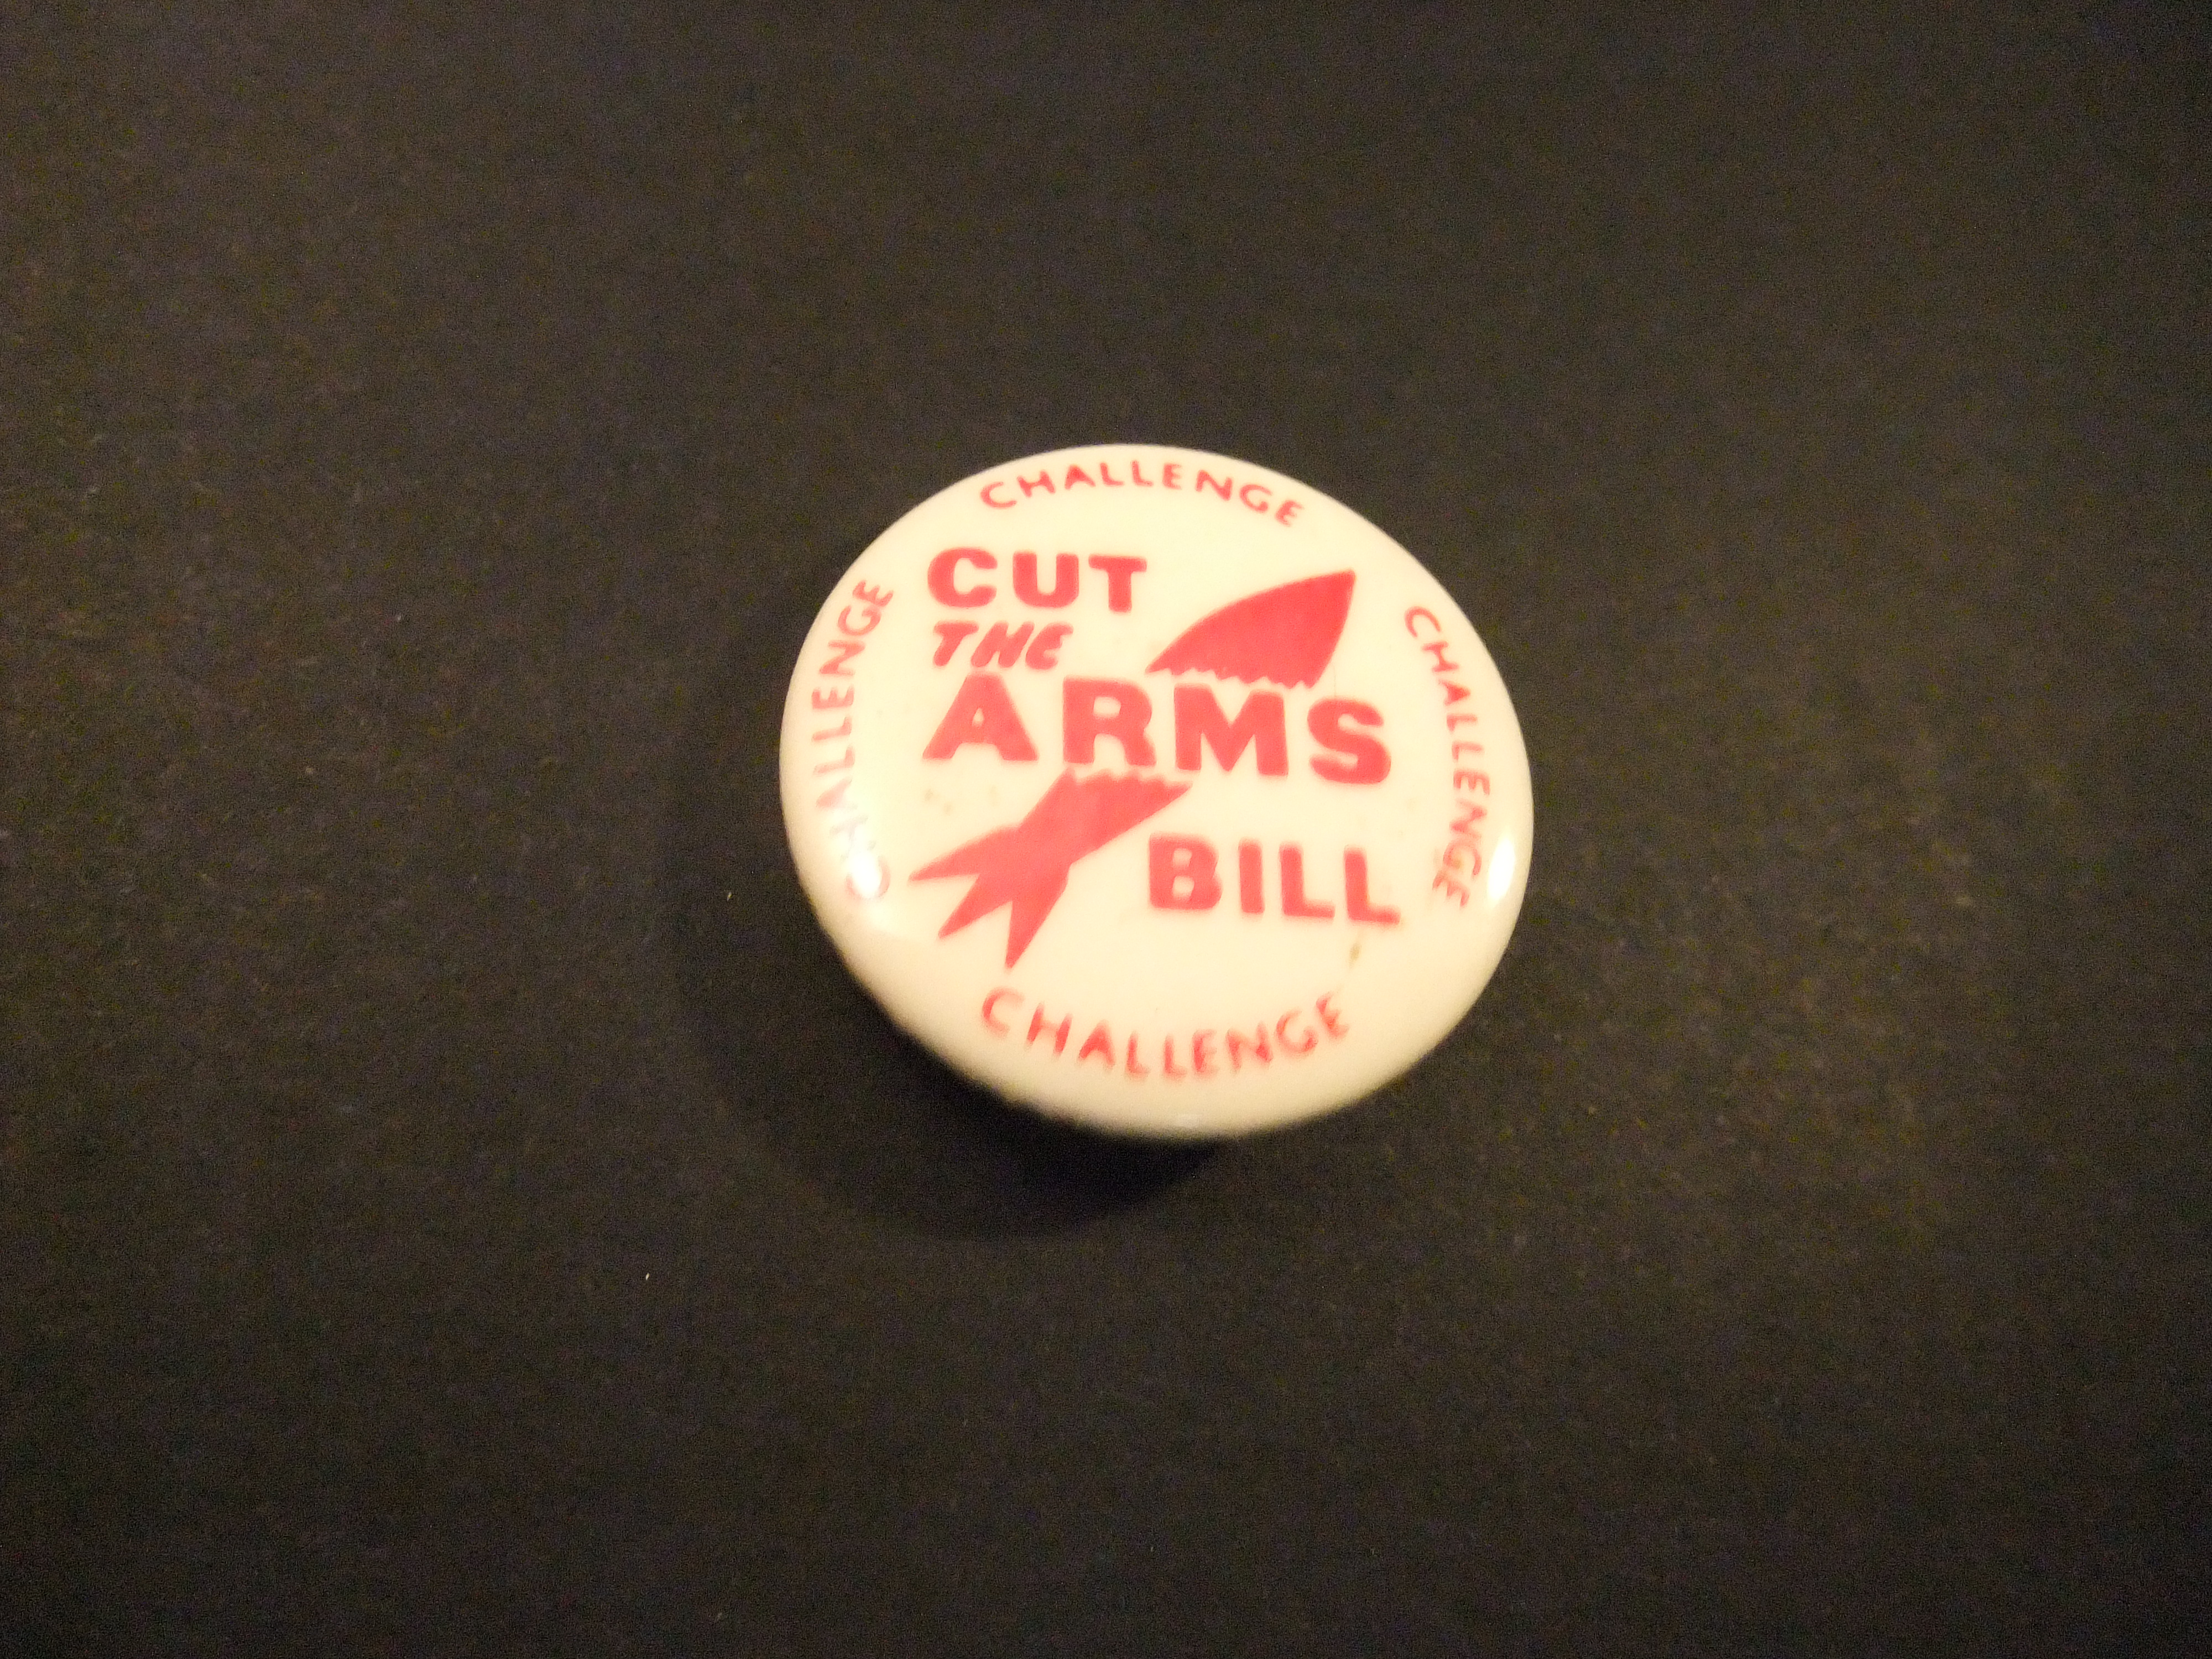 Cut the Arms Bill Challenge (anti-atoombom protest)